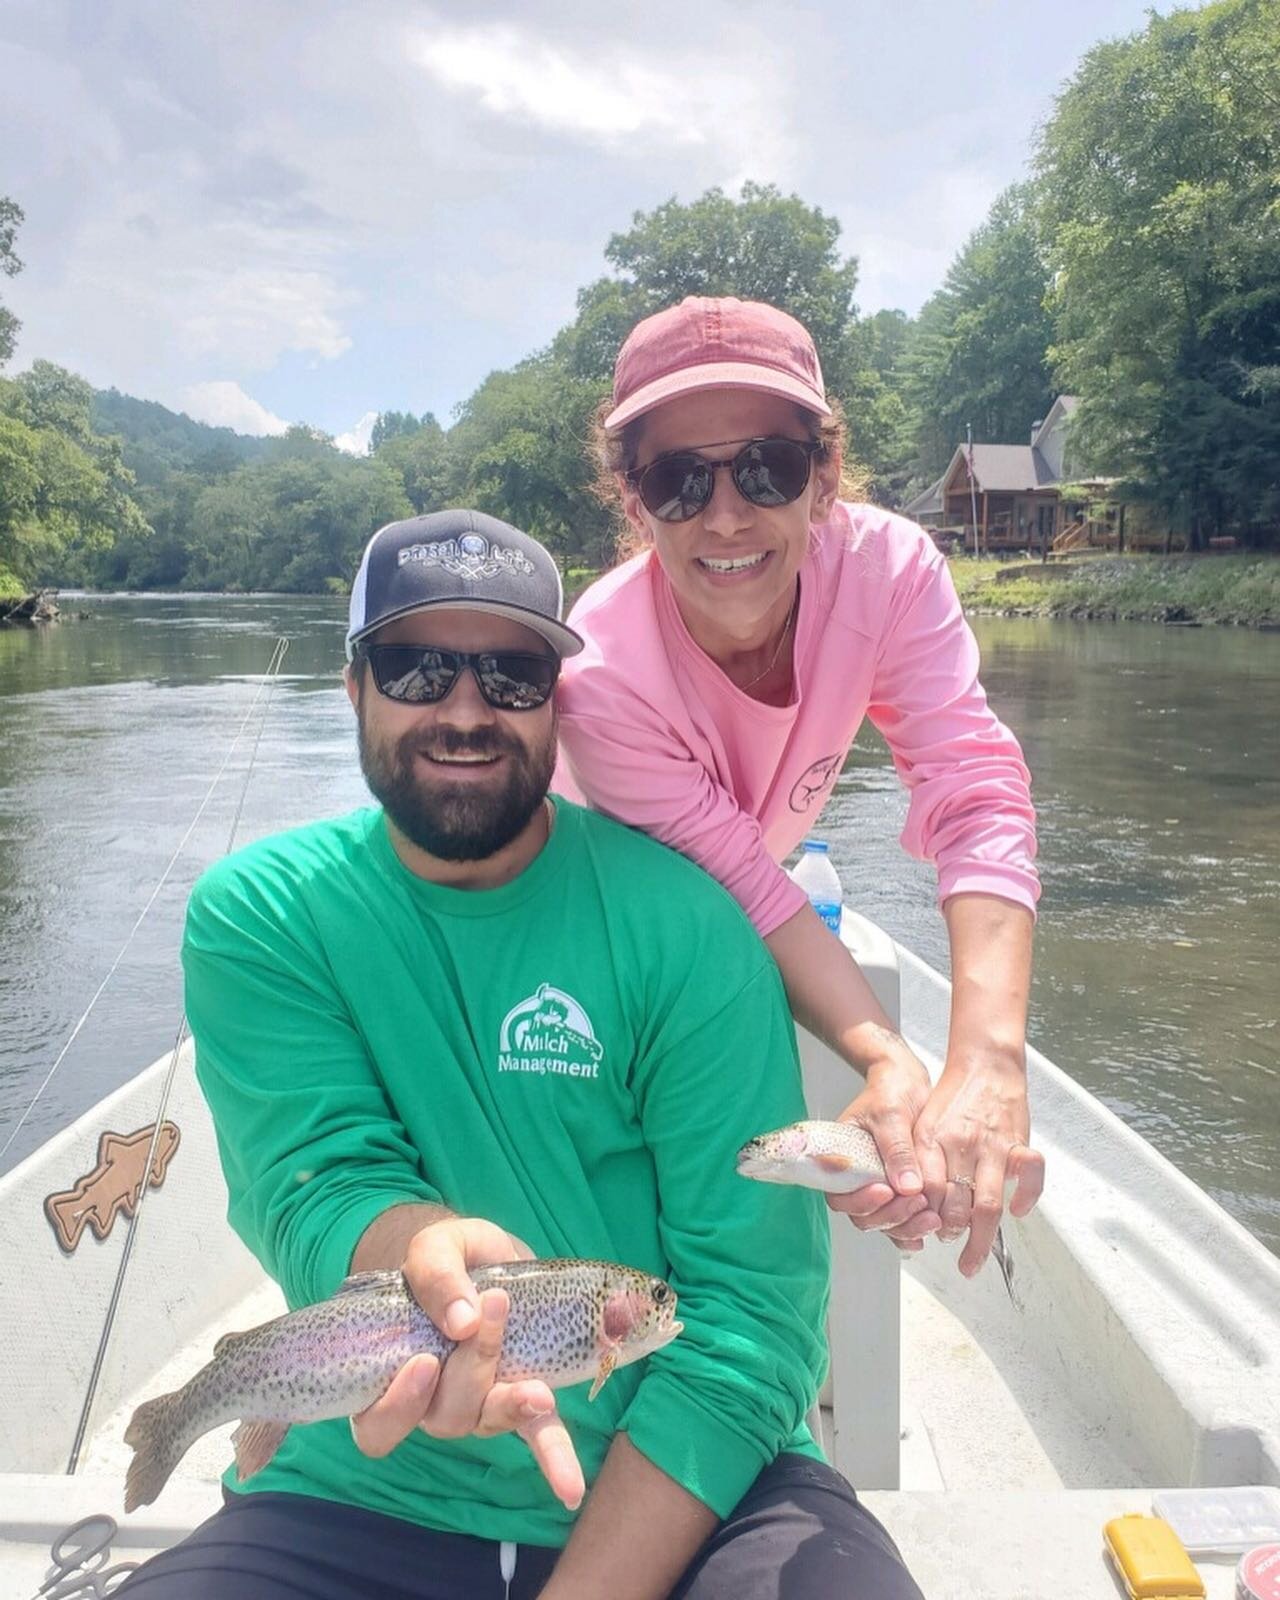 It was a busy day today for the Bowman boys and there&rsquo;s a bunch of fish with some sore mouths! Both trout fishing and smallmouth fished great today! 
.
.
.
.
.
.
#flyfishblueridge #onthewater #getoutdoors #bowmanflyfishing #flyfishing #flytying